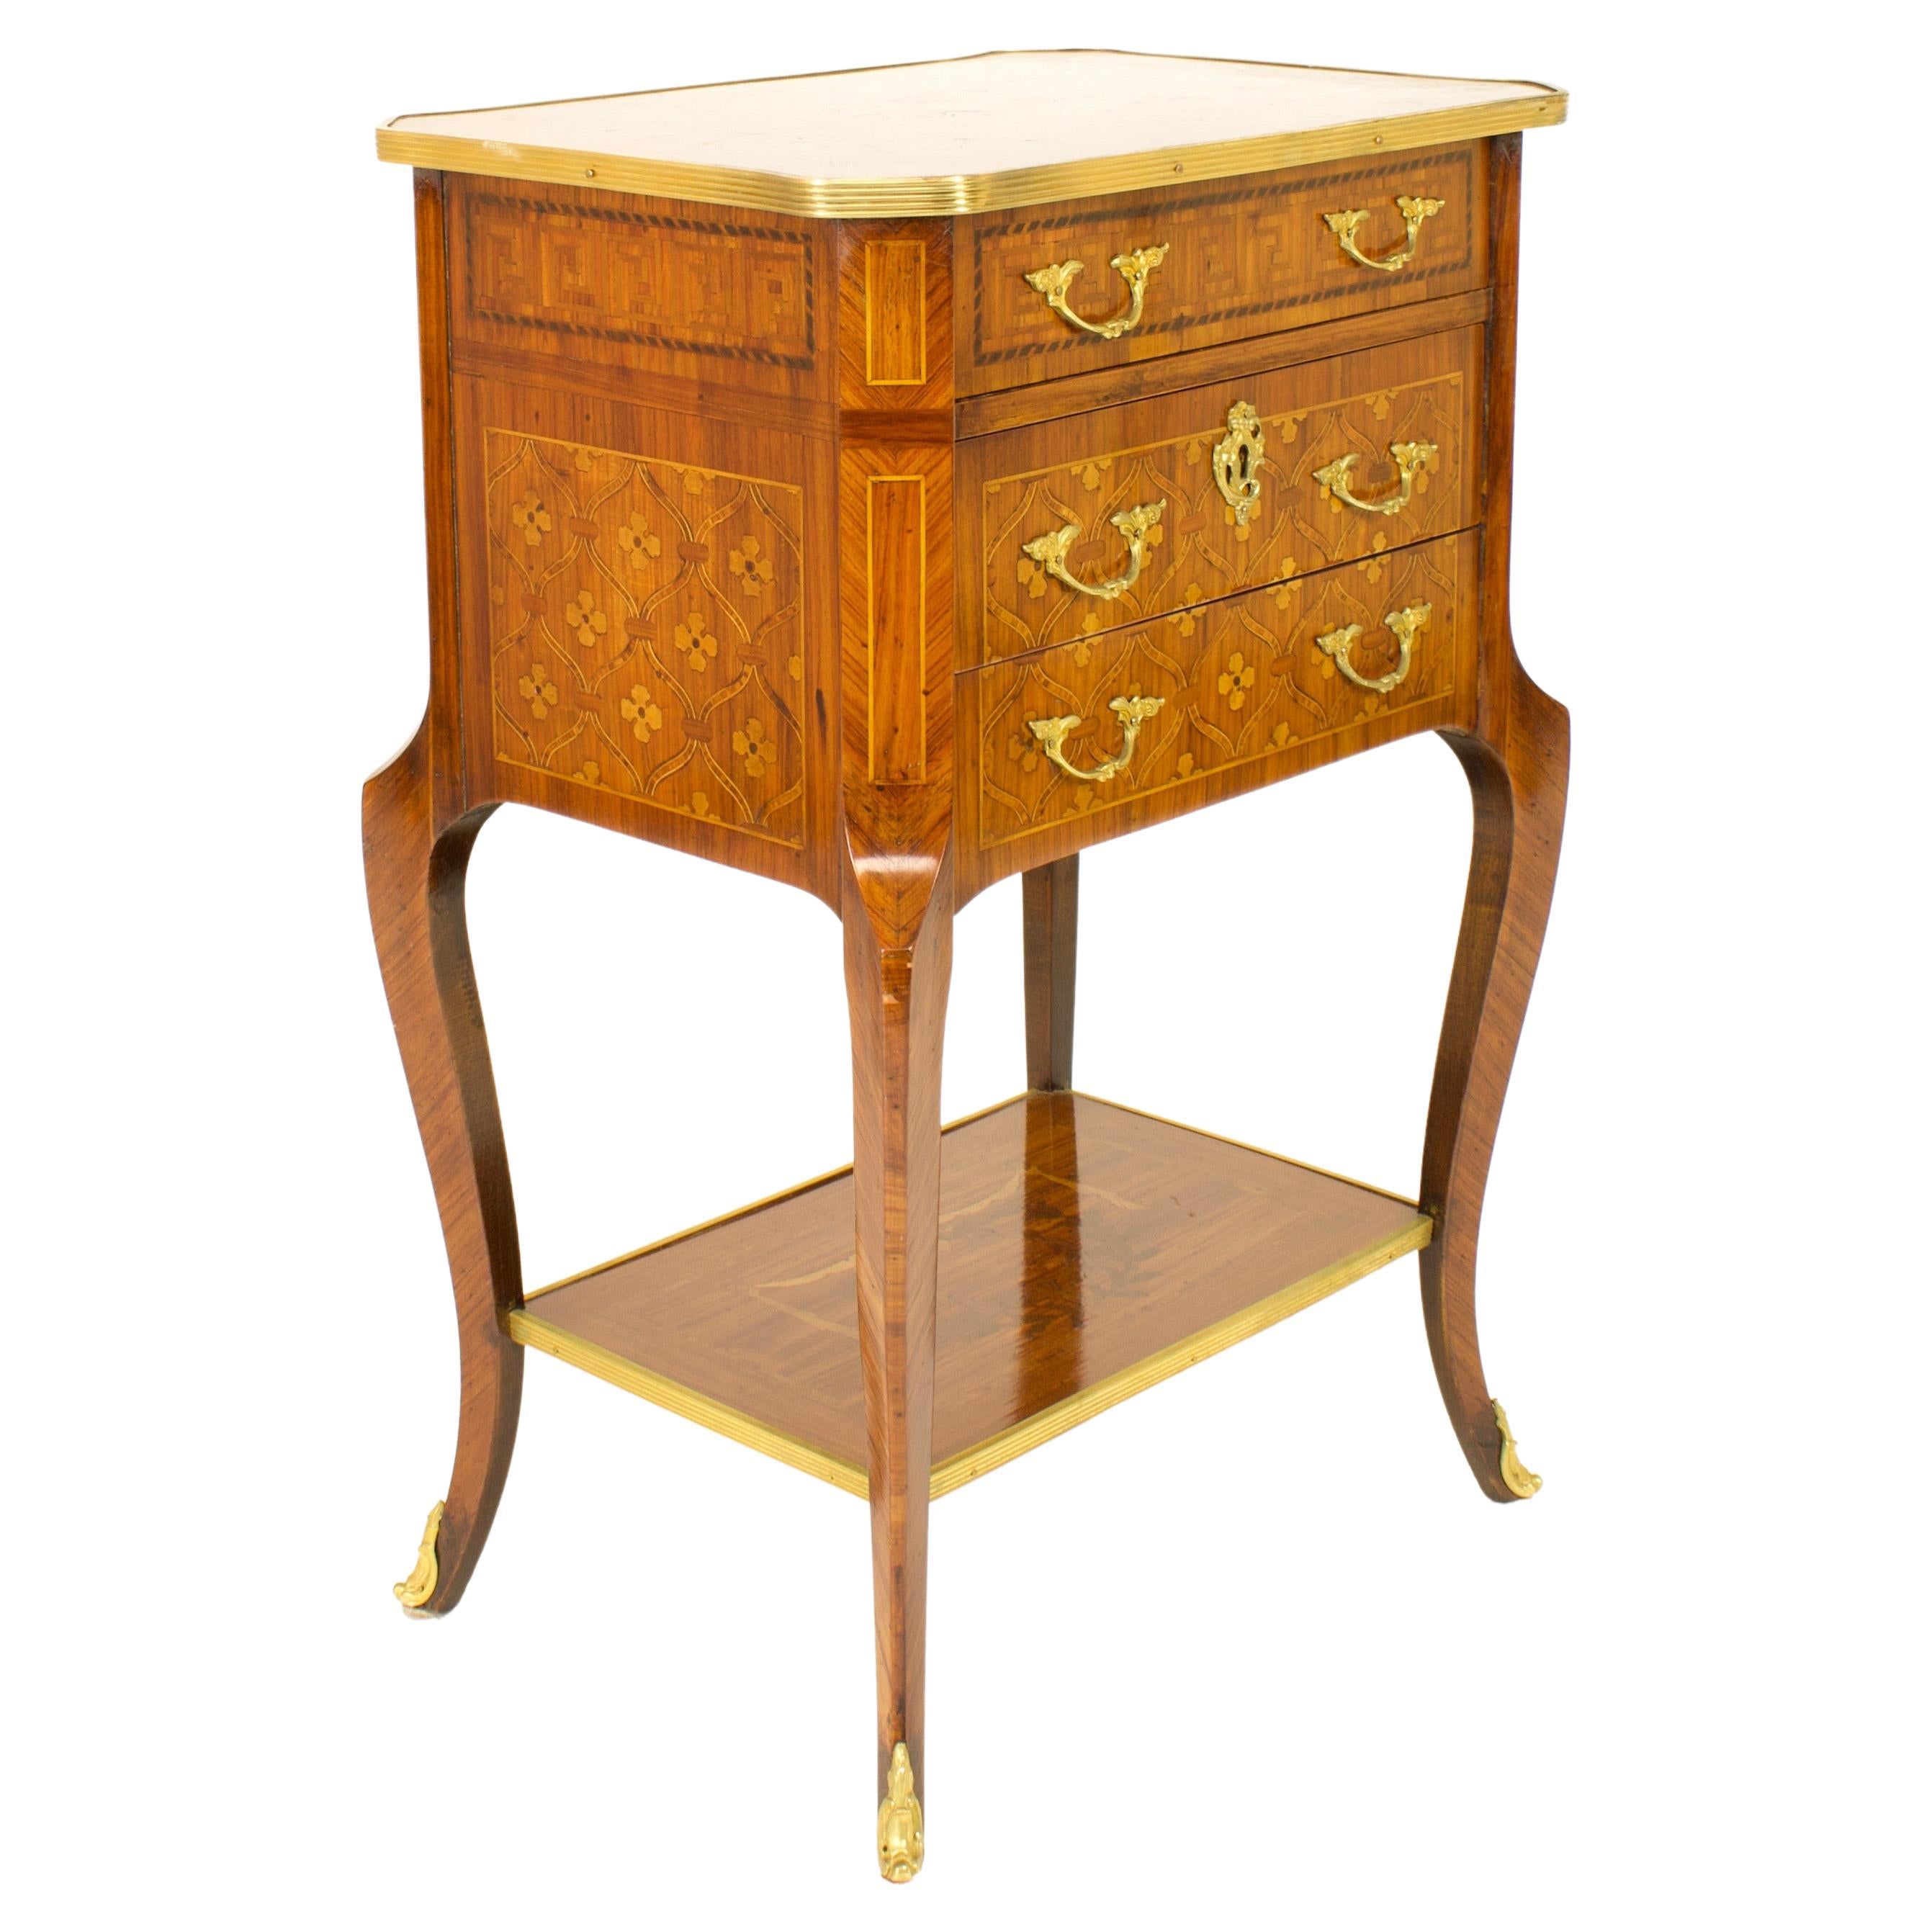 Late 19th Century French Transition/Louis XVI Marquetry a la Reine Side Table For Sale